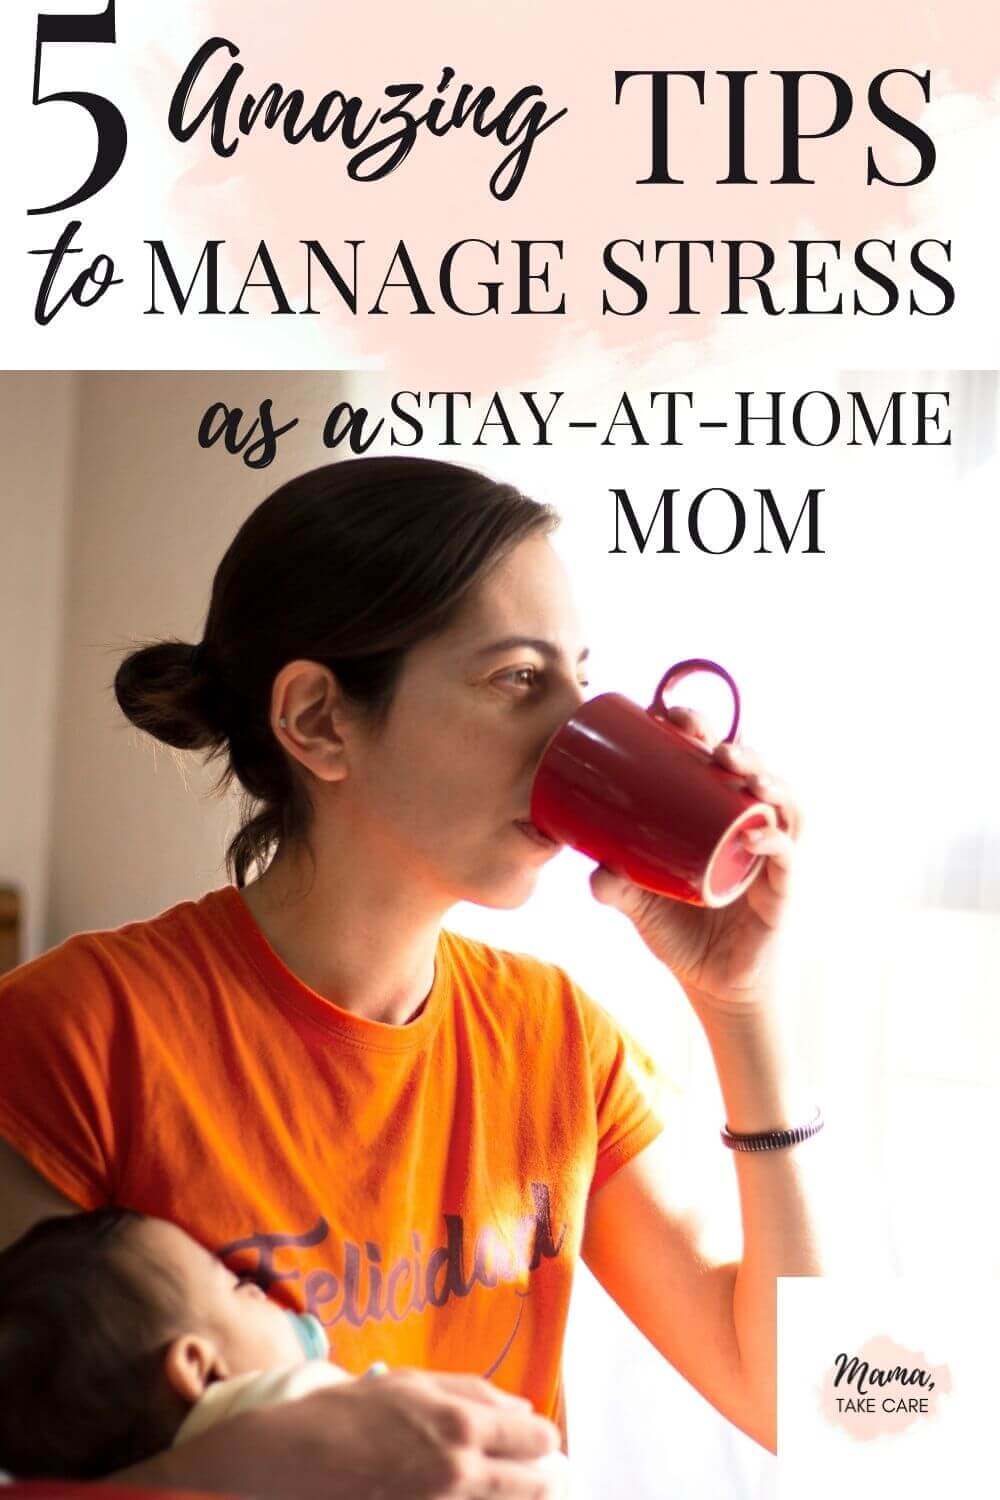 5 Tips for managing stress as a stay-at-home mom - women drinking coffee holding baby